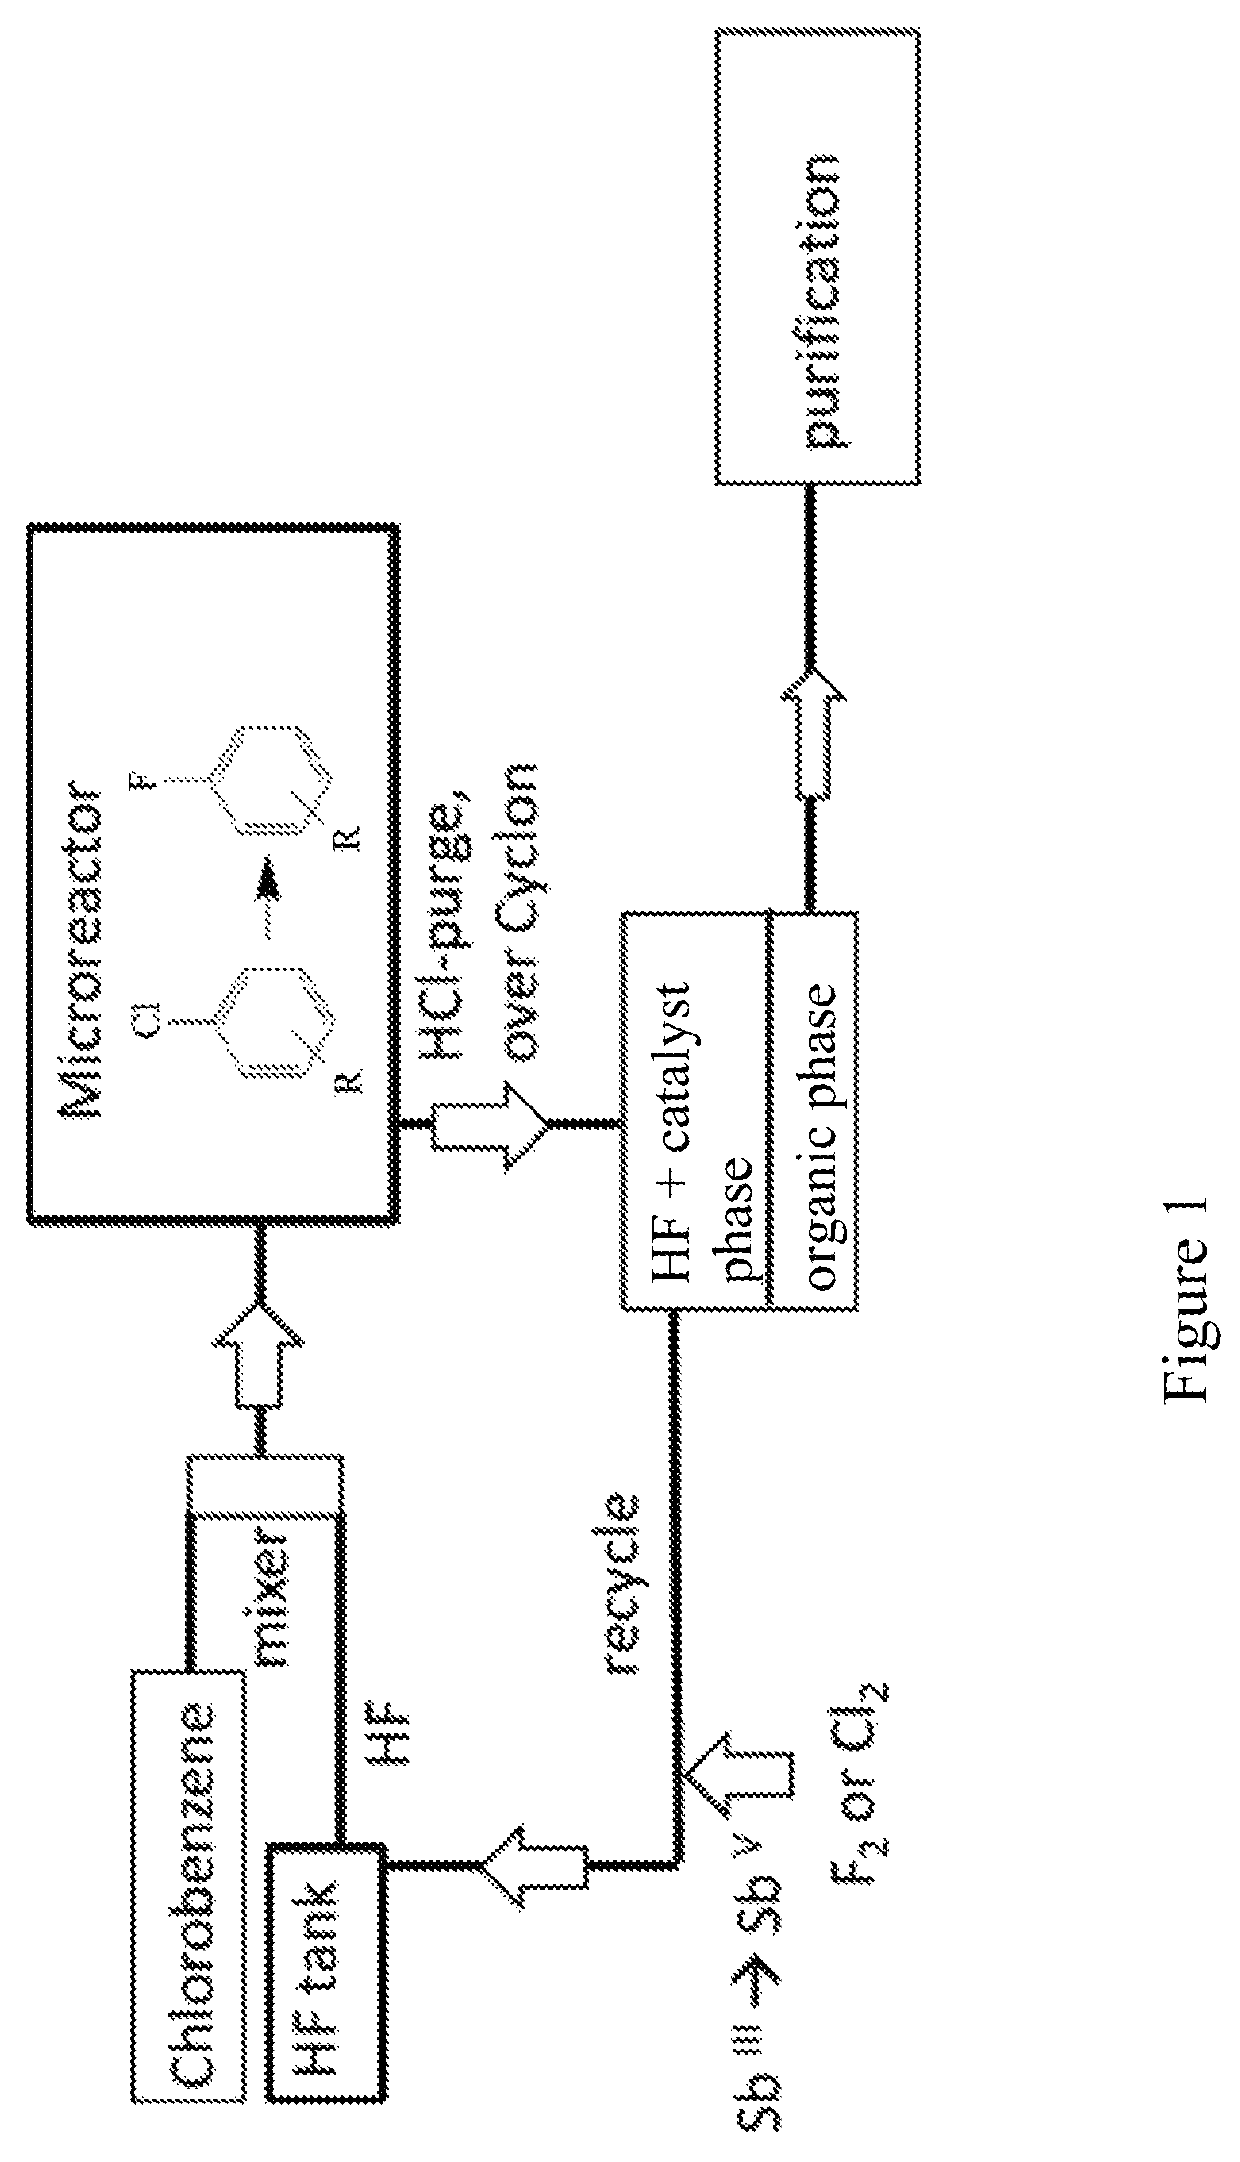 Process for the Manufacture of Fluoroaryl Compounds and Derivatives